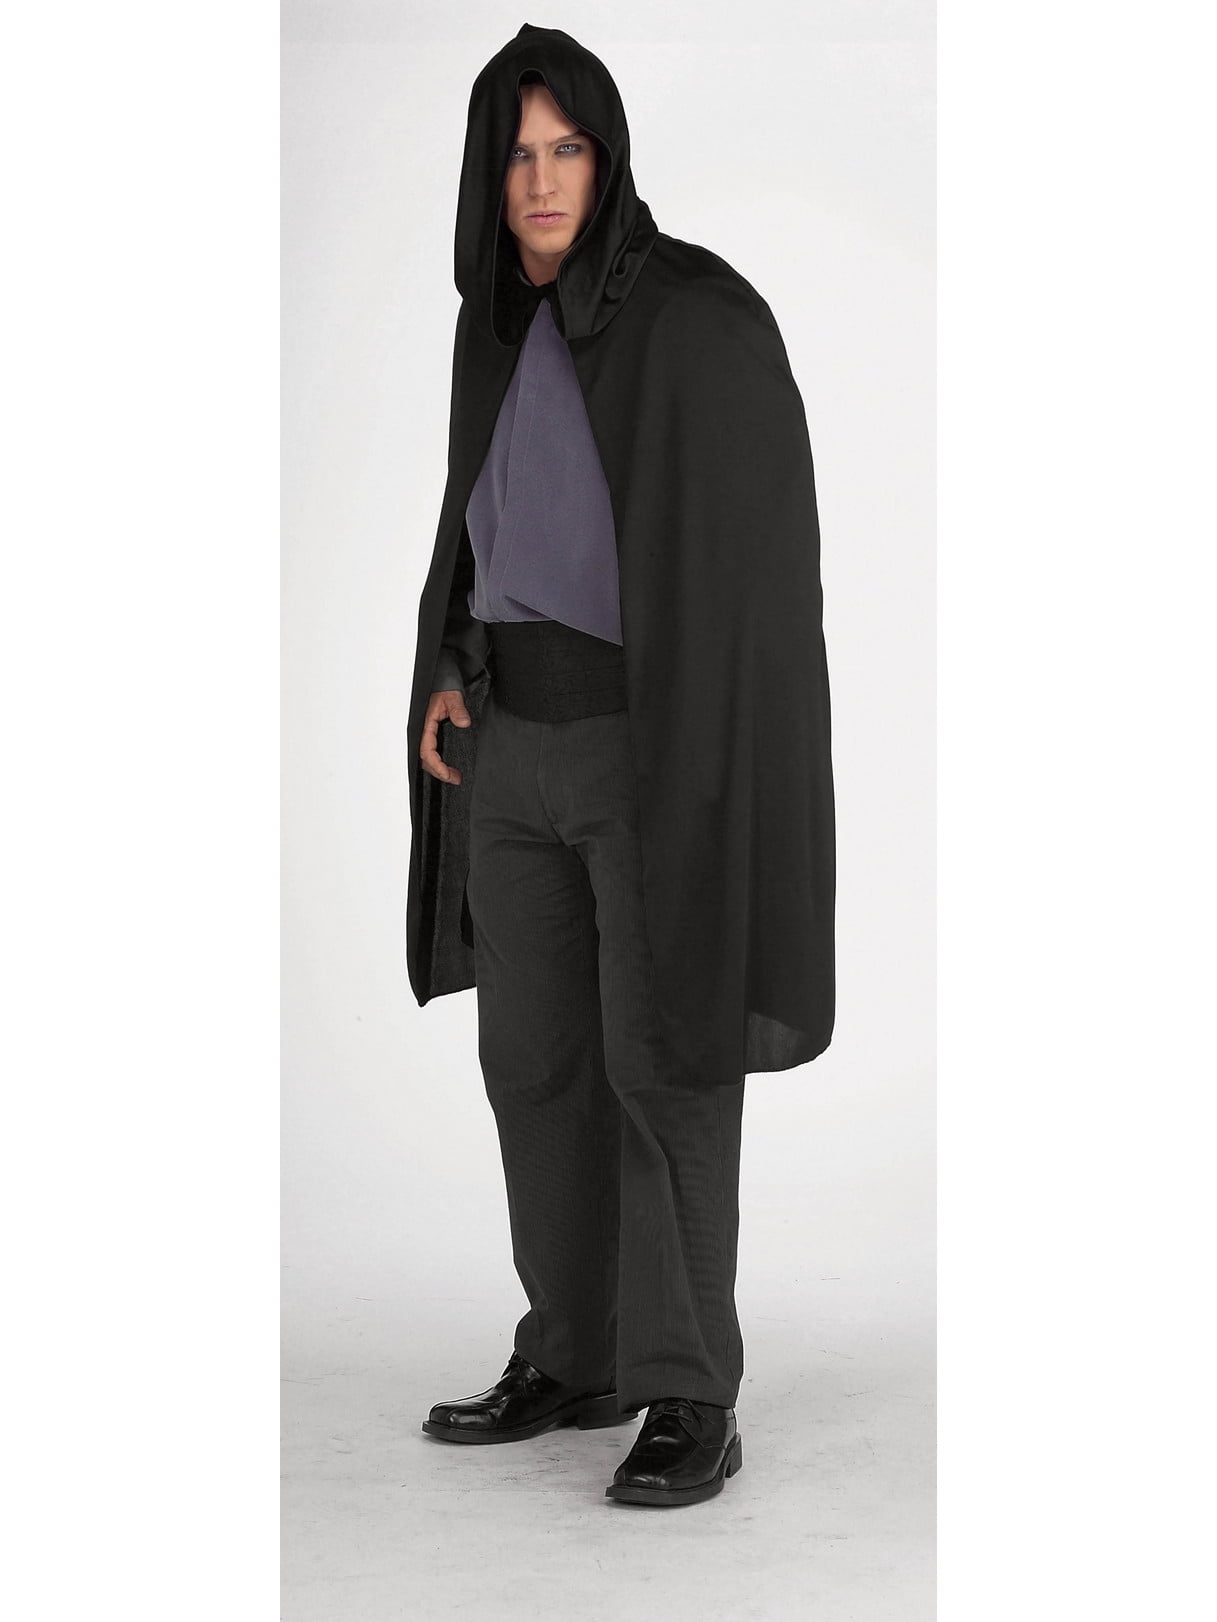 Rubie's Adult 45 Hooded Costume Cape, Black, One Size 